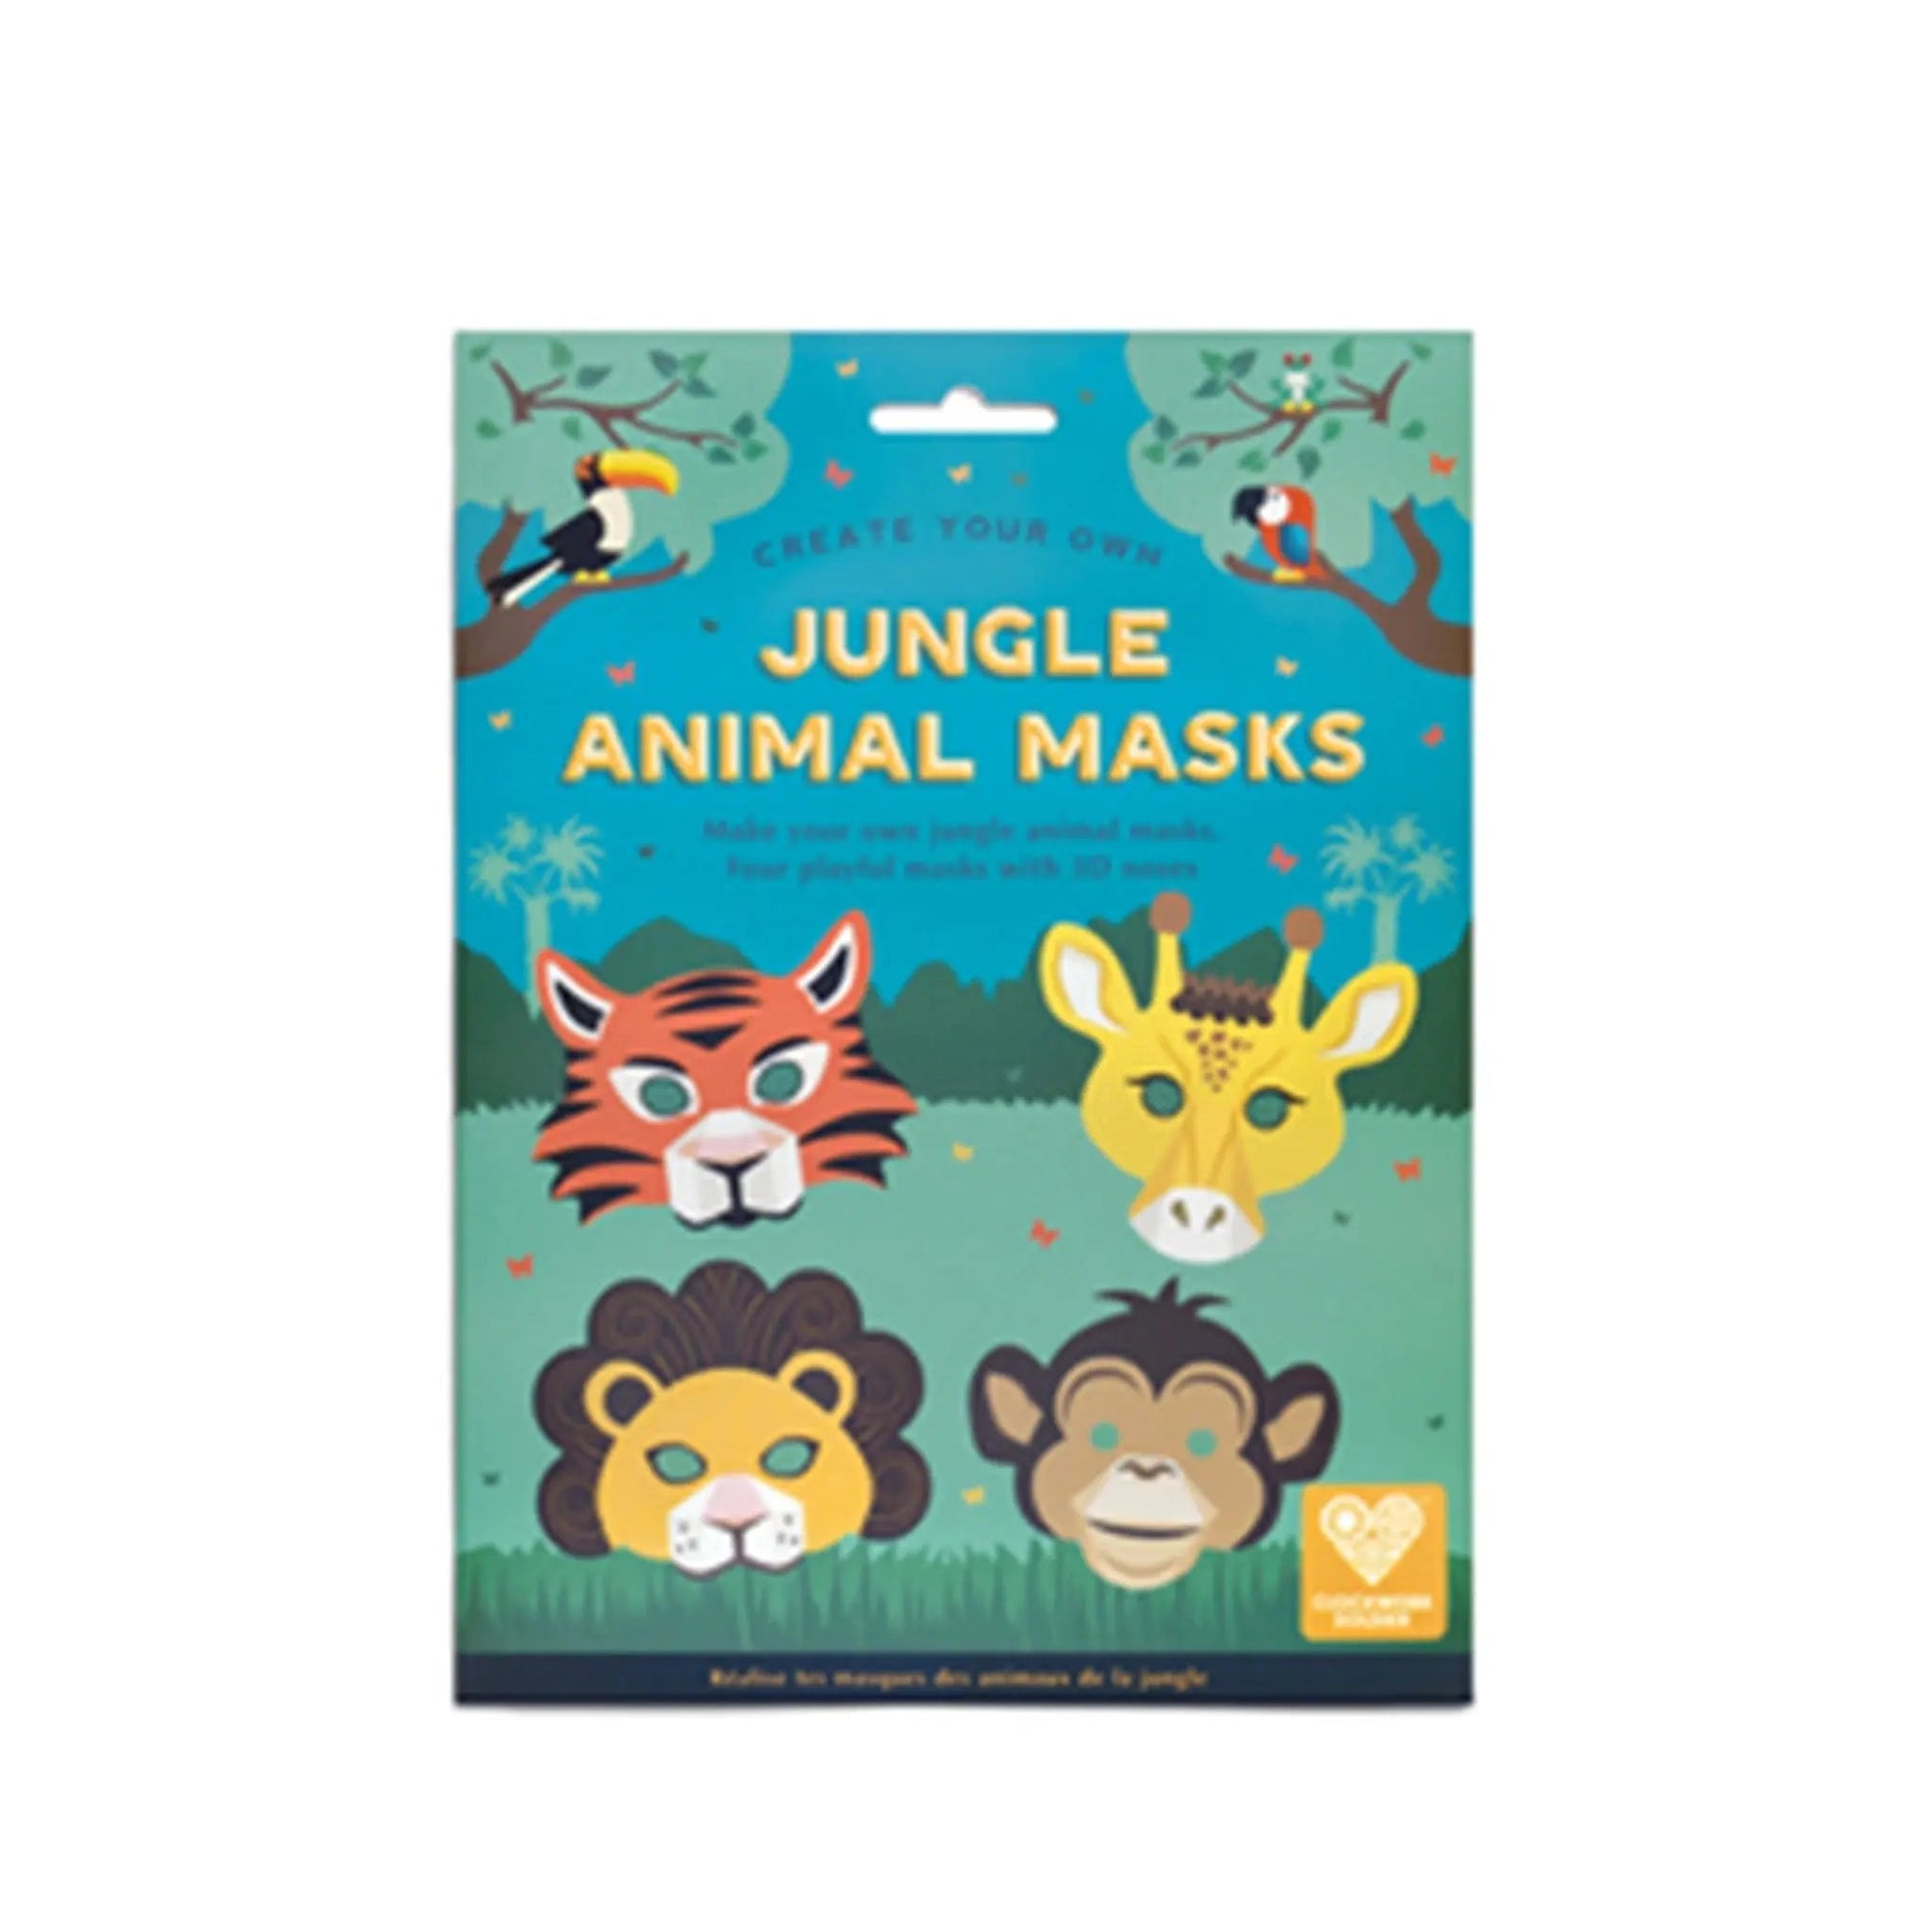 Create your own Jungle Animal Masks - Clockwork Soldier - The Forgotten Toy Shop